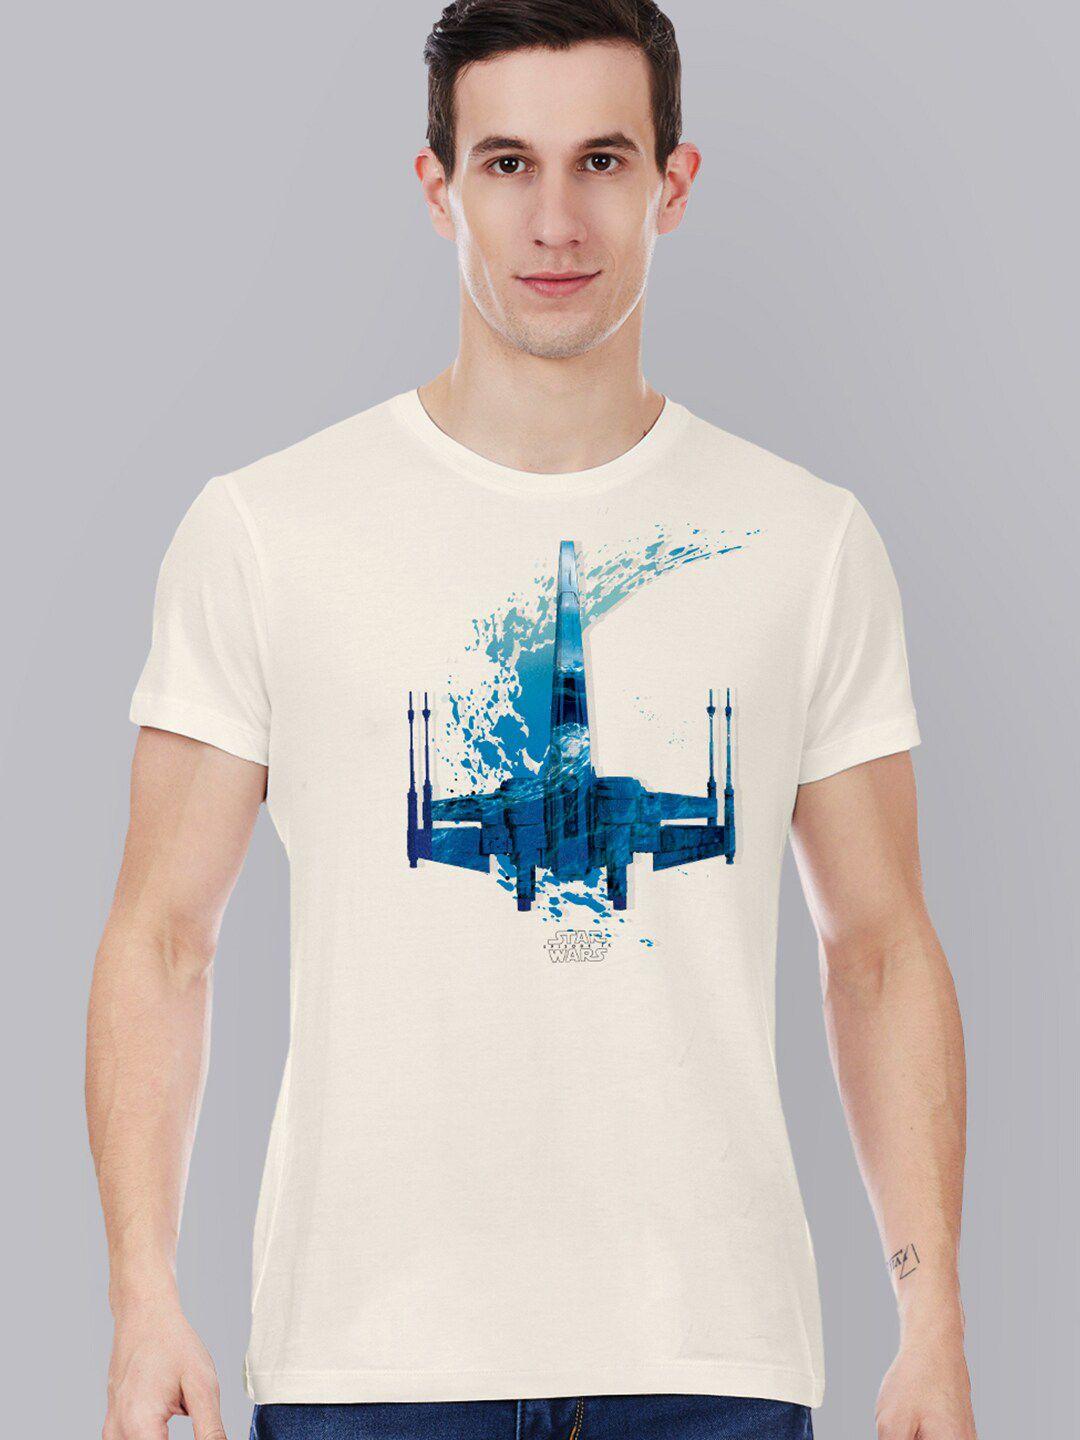 free authority men off white & blue star wars printed pure cotton t-shirt